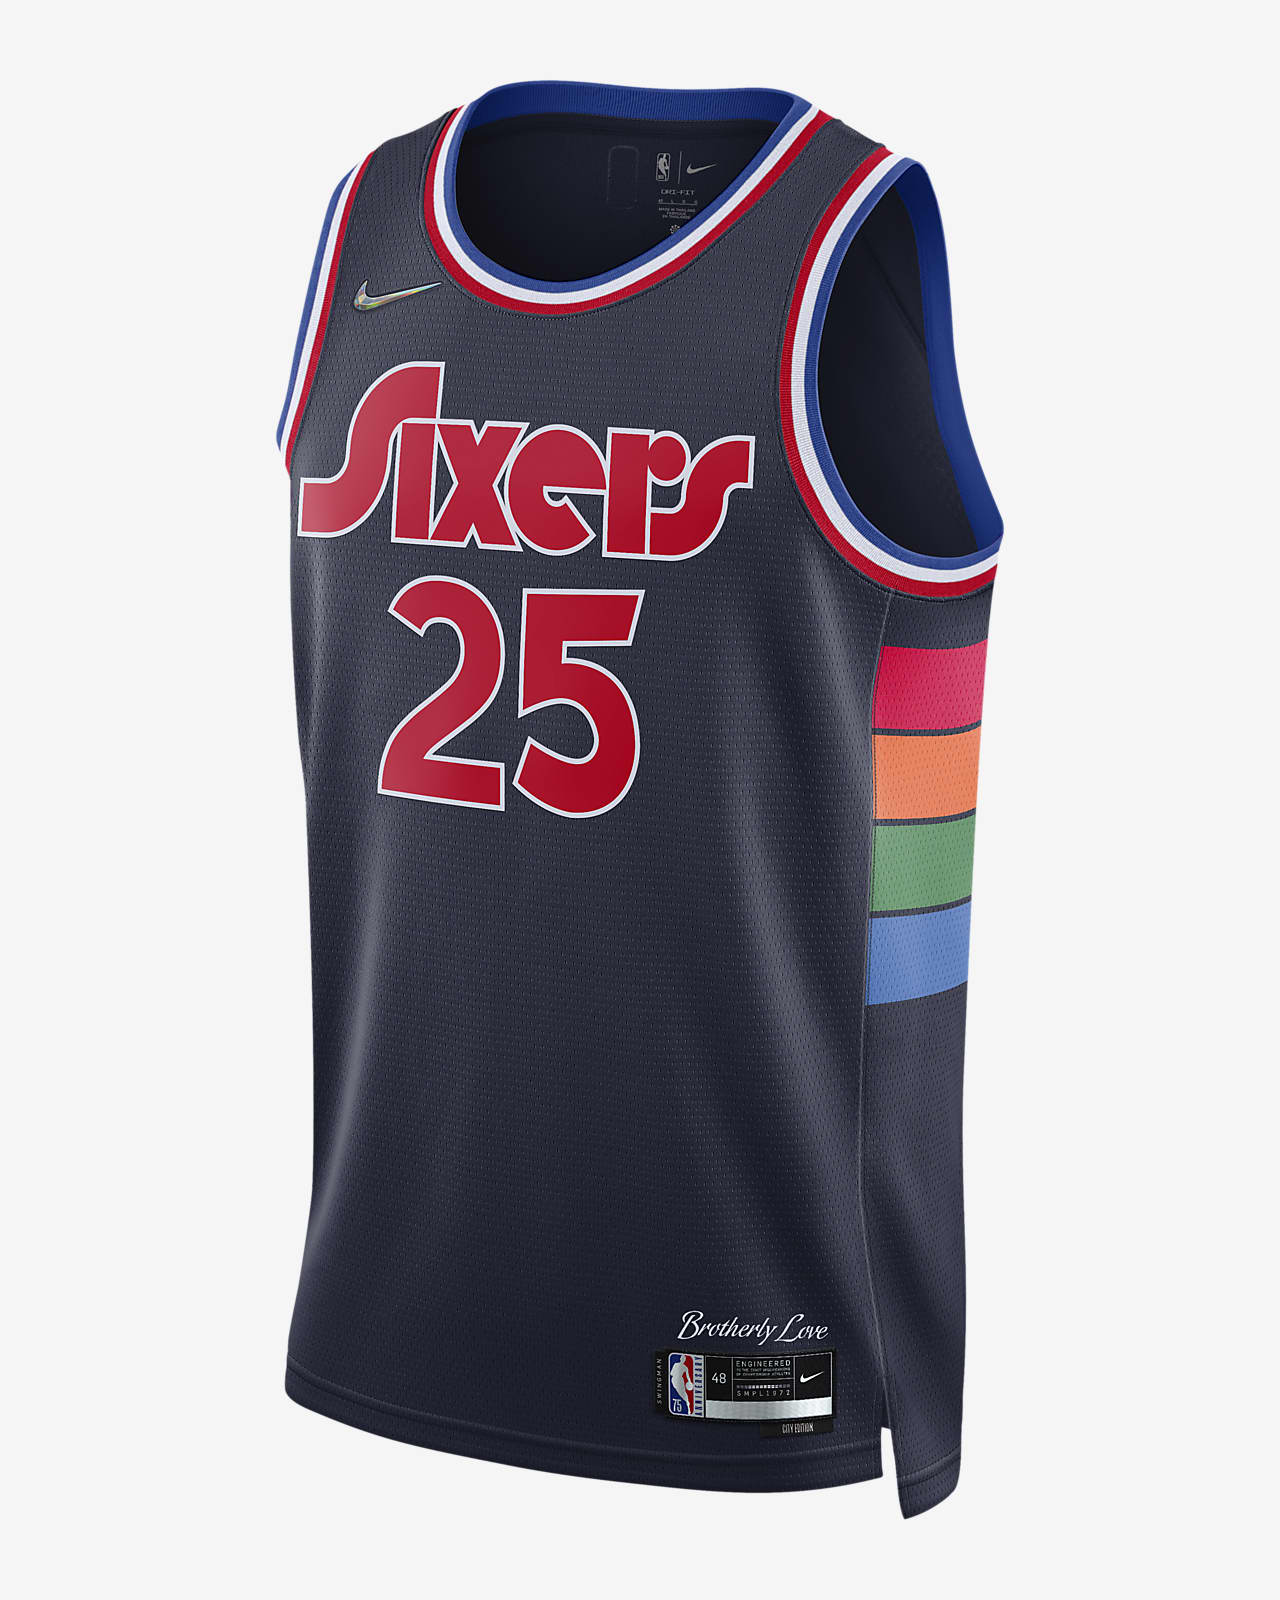 sixers jersey,Save up to